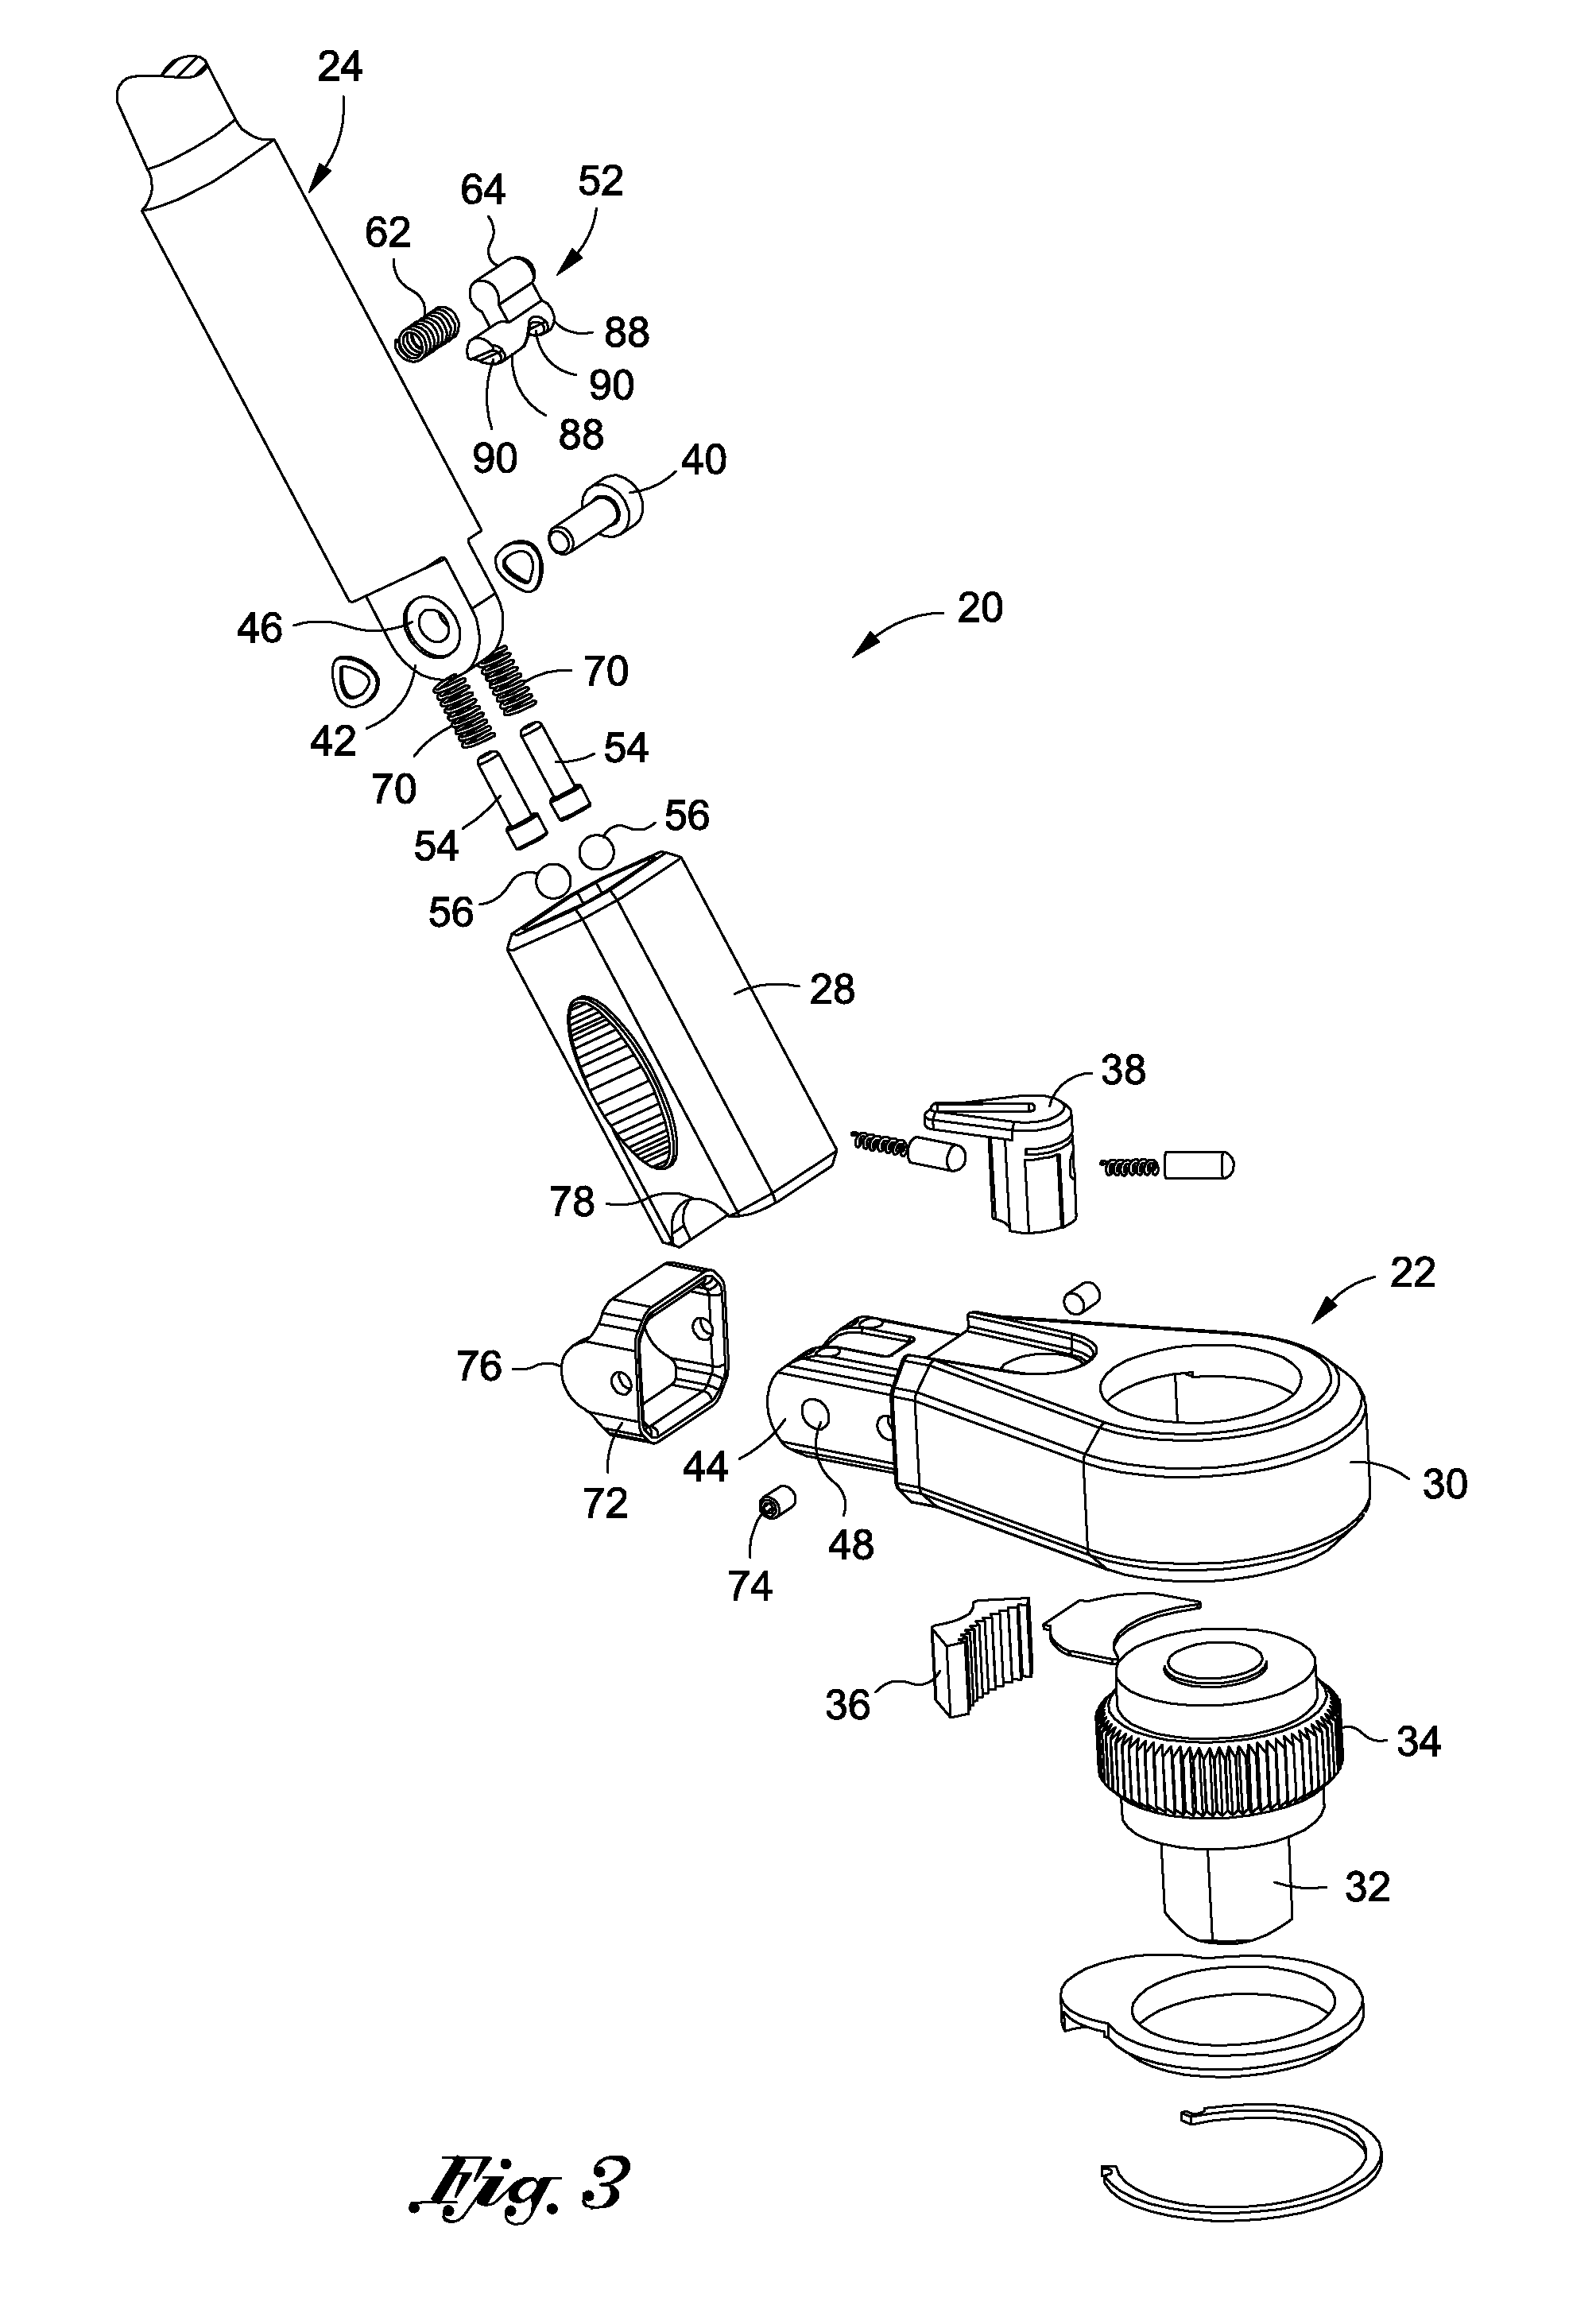 Hand tool having a head which is position-adjustable and lockable relative to a handle